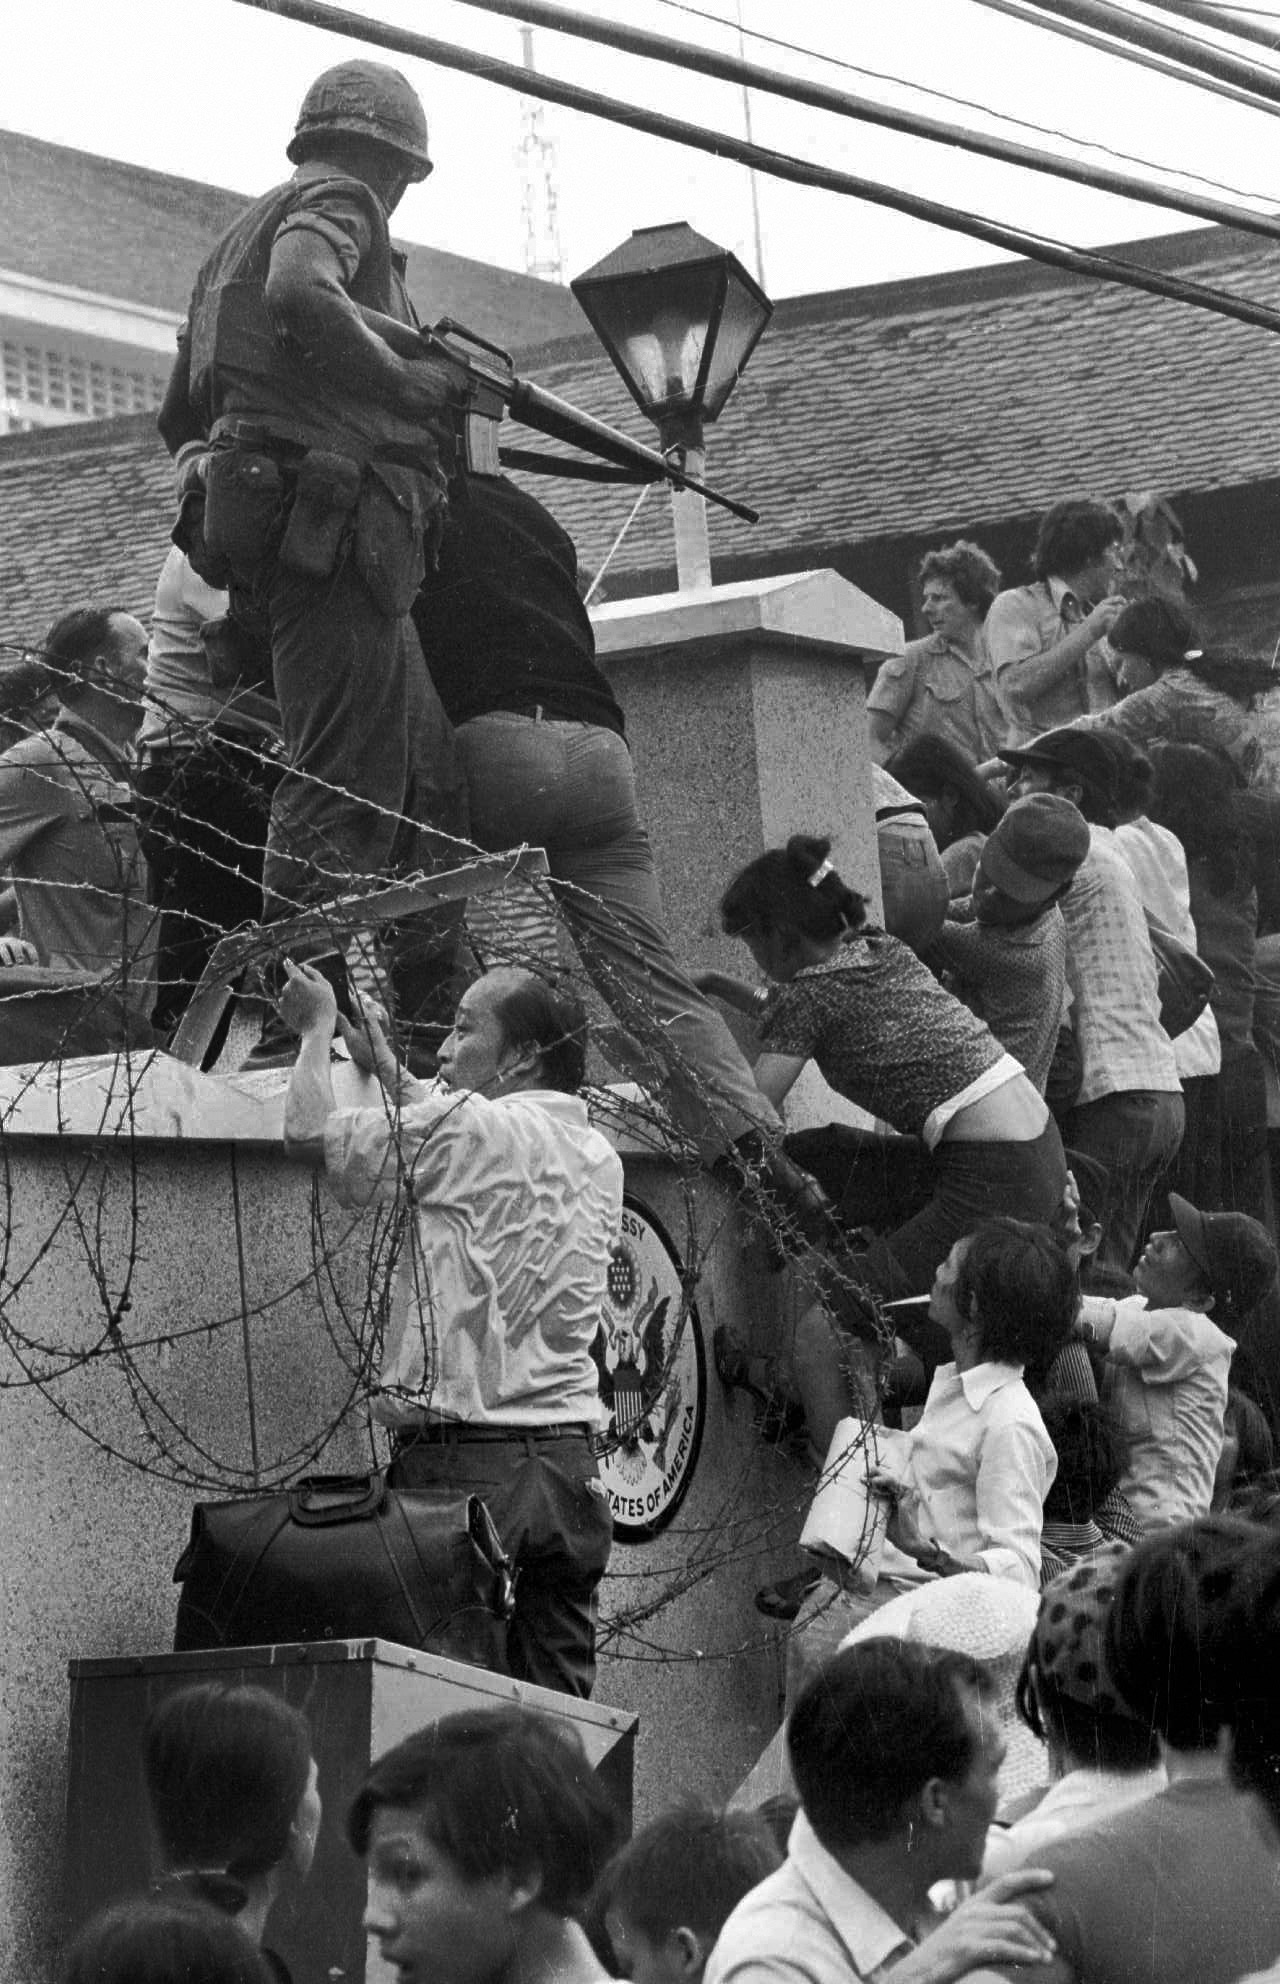 FILE - In this April 29, 1975 file photo, people try to scale the 14-foot wall of the U.S. embassy in Saigon, trying to reach evacuation helicopters, as the last of the Americans depart from Vietnam. (AP Photo/Neal Ulevich, File)